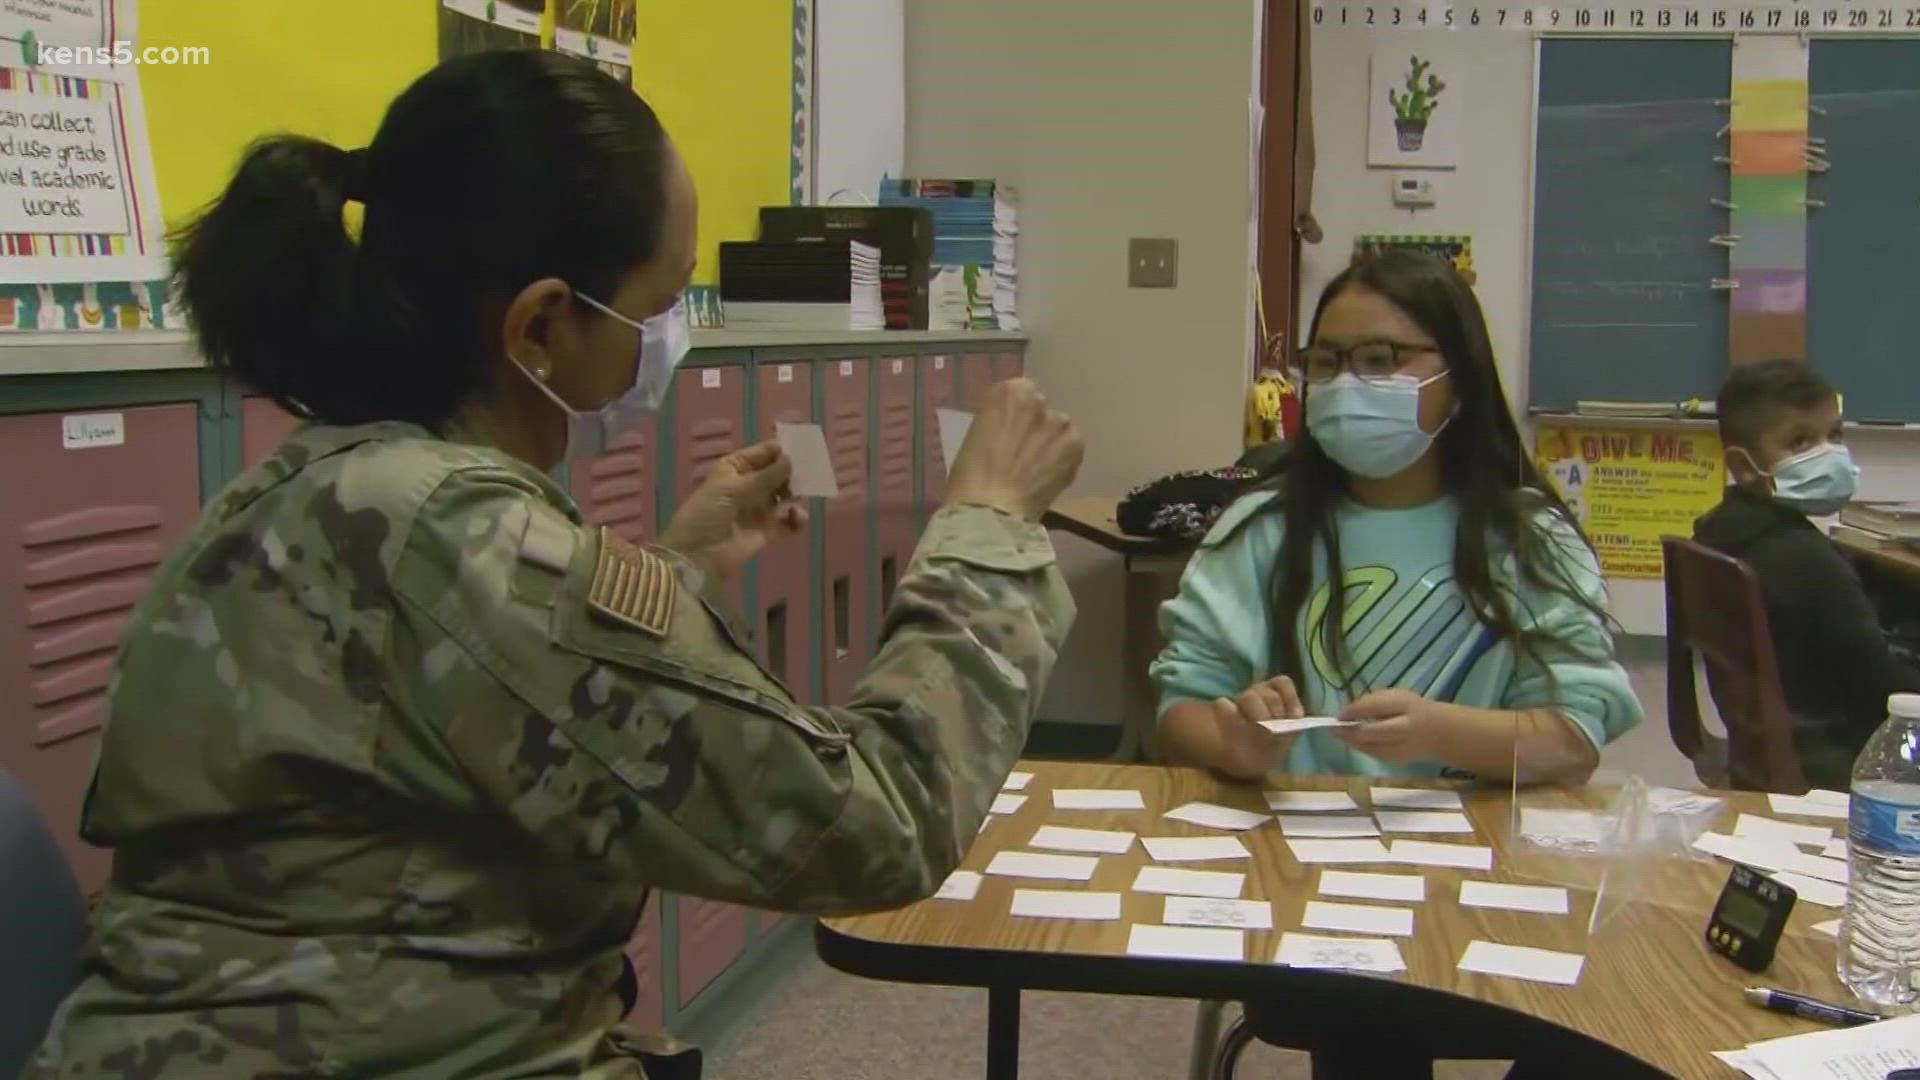 At least 80 troops have volunteered, and go through substitute teacher training before entering the classroom.